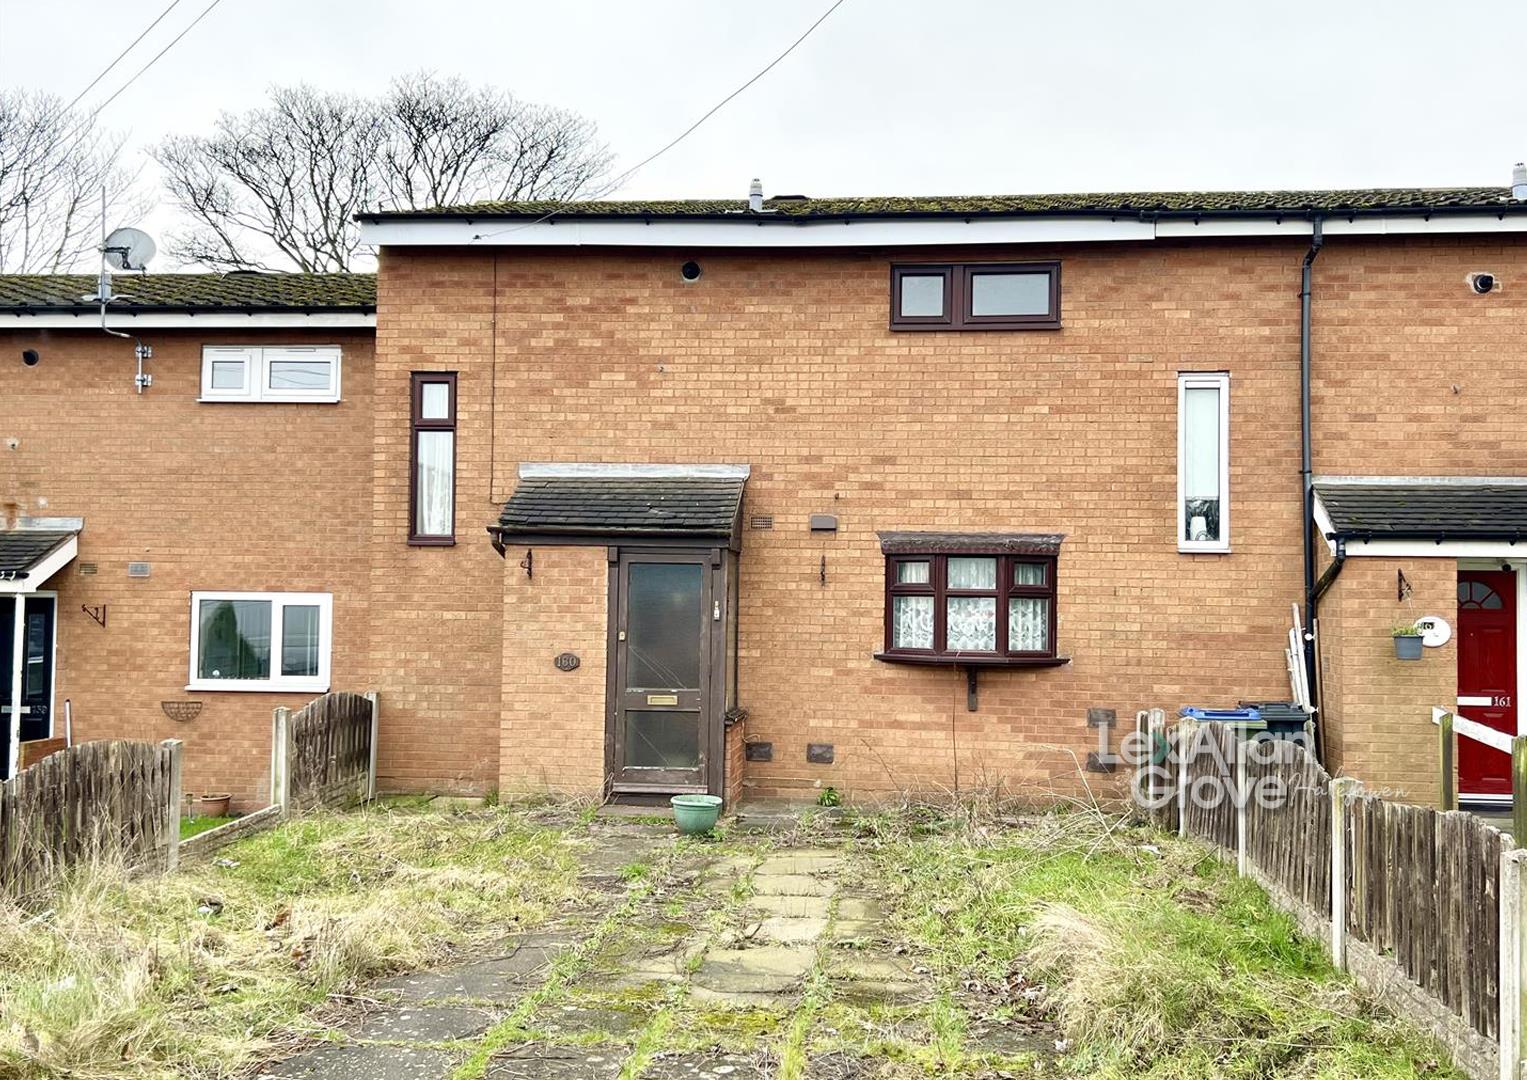 2 bed terraced house for sale in Dudley Port, Tipton - Property Image 1